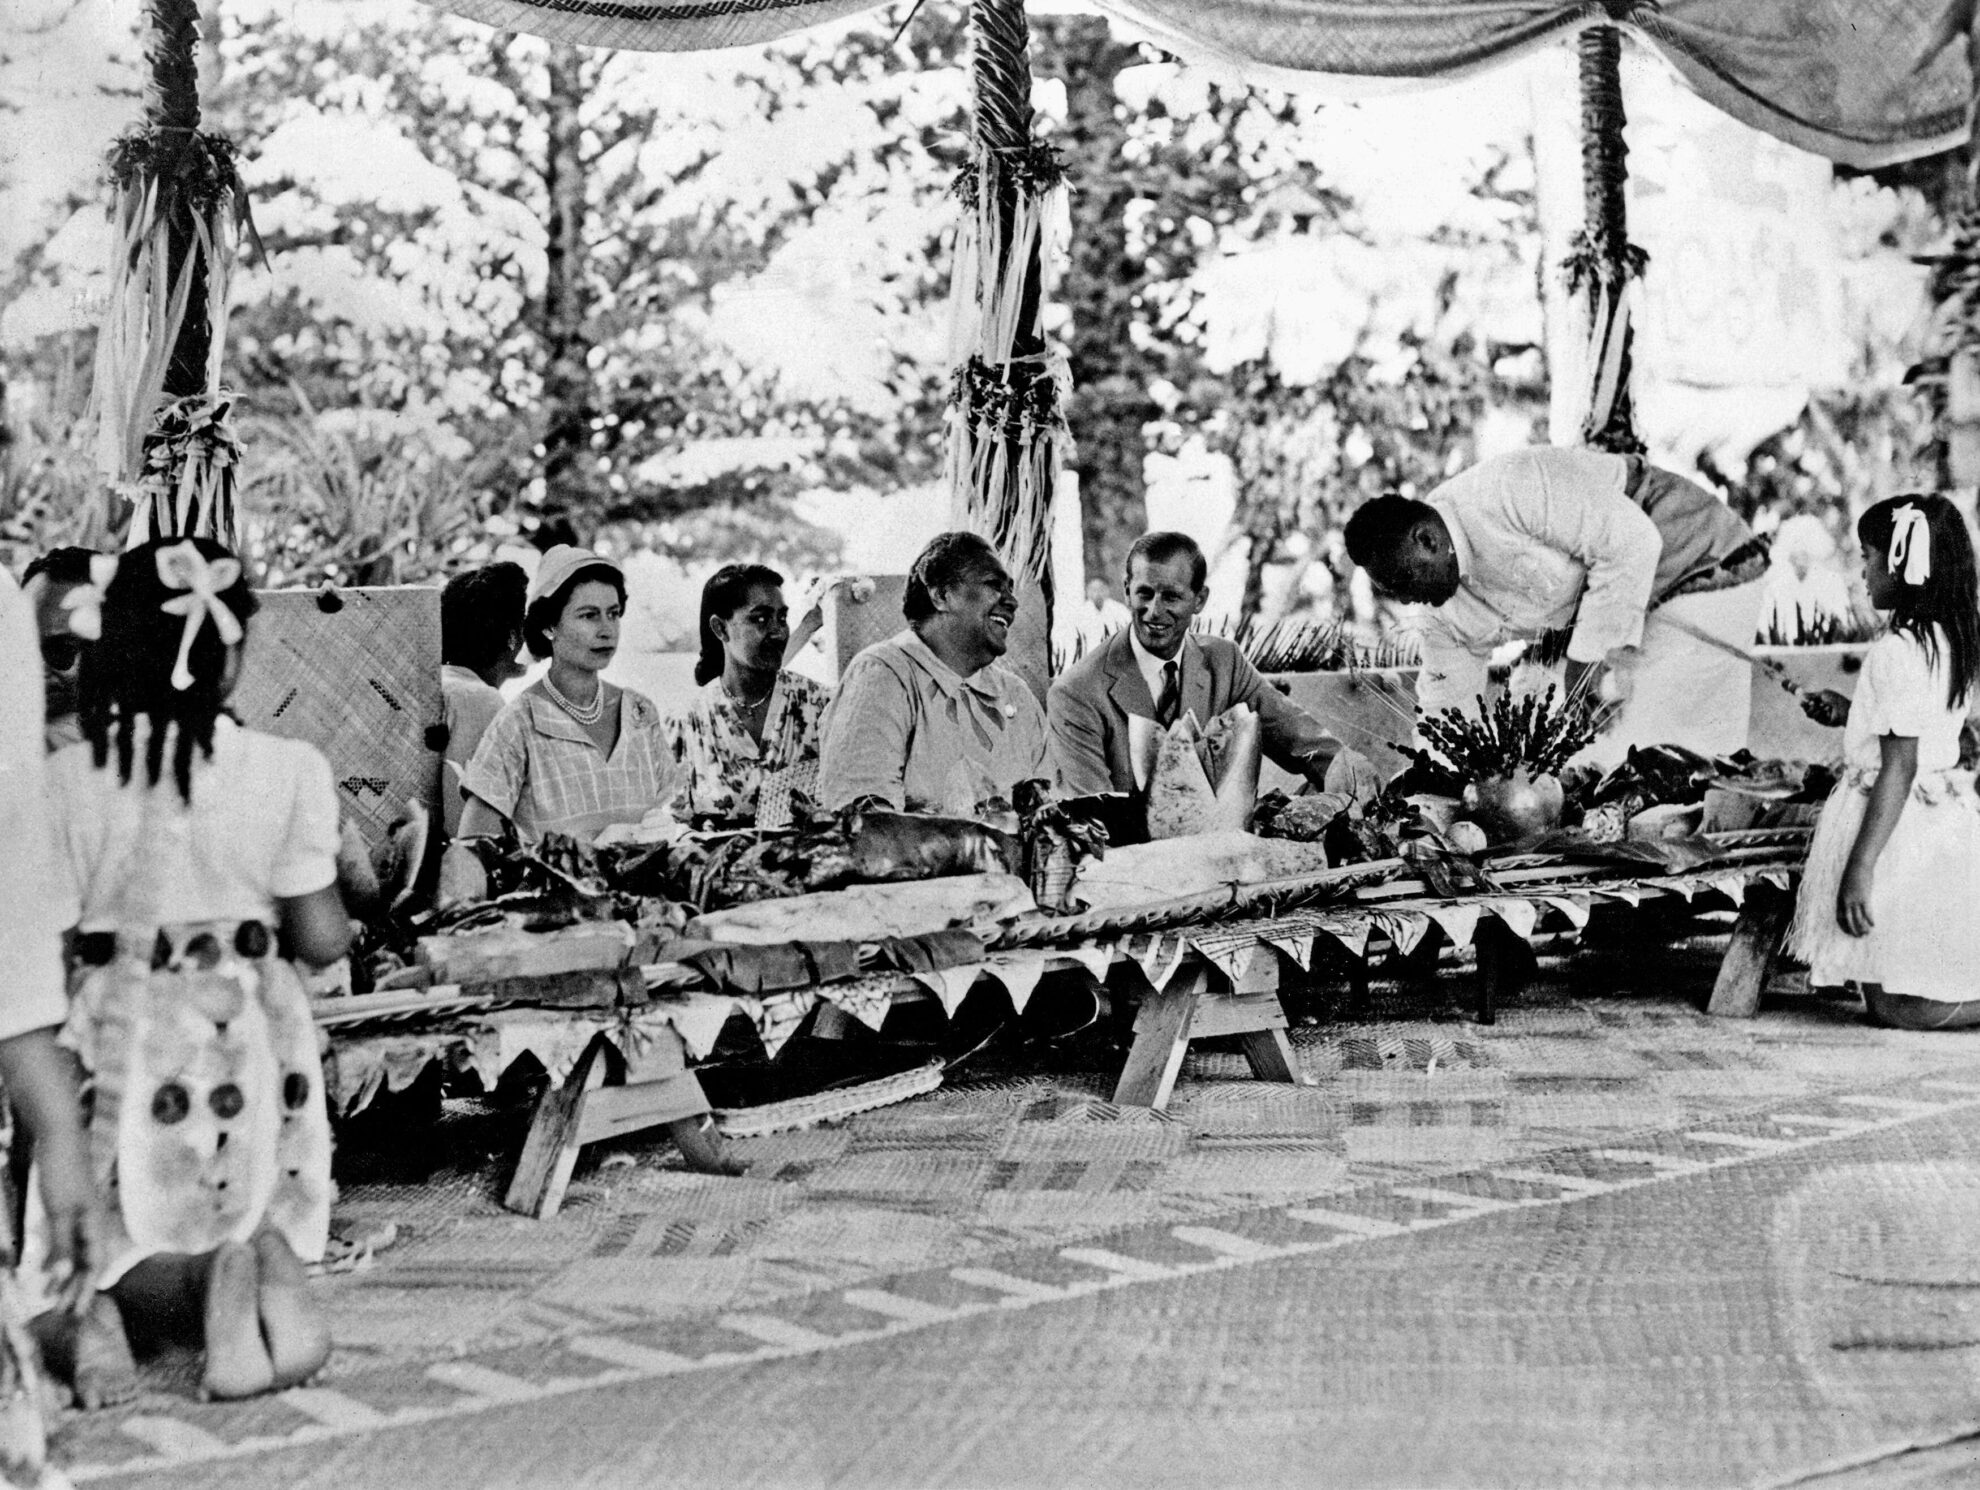 Queen Elizabeth II and Prince Philip with the Queen of Tonga at a feast at which a roasted pig was placed in front of every person, during the Royal Tour of the Commonwealth 19-20 December 1953.